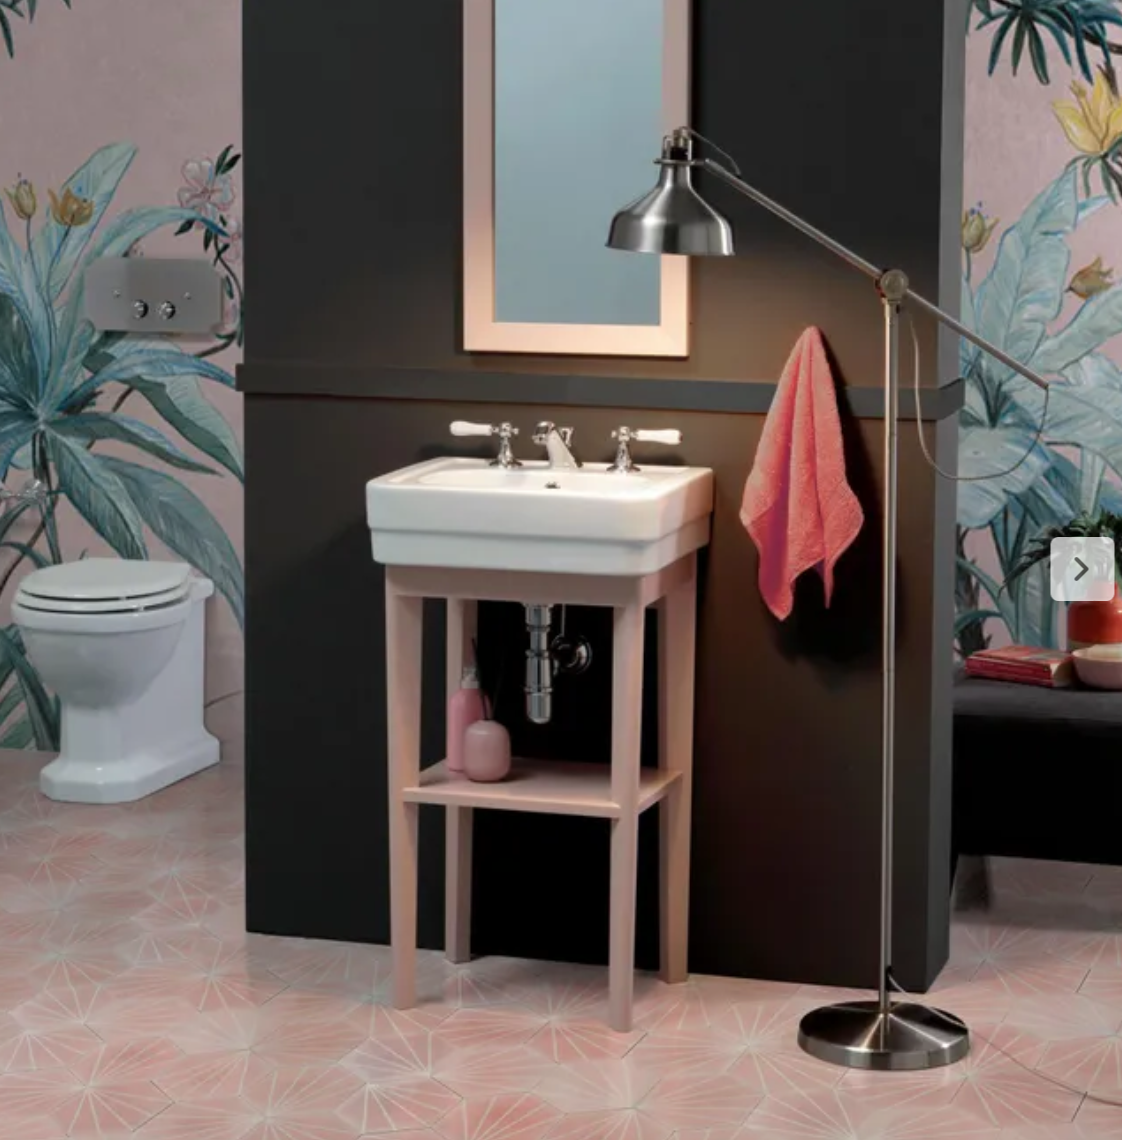 Ceramic washbasin with open wooden cabinet in Classic style